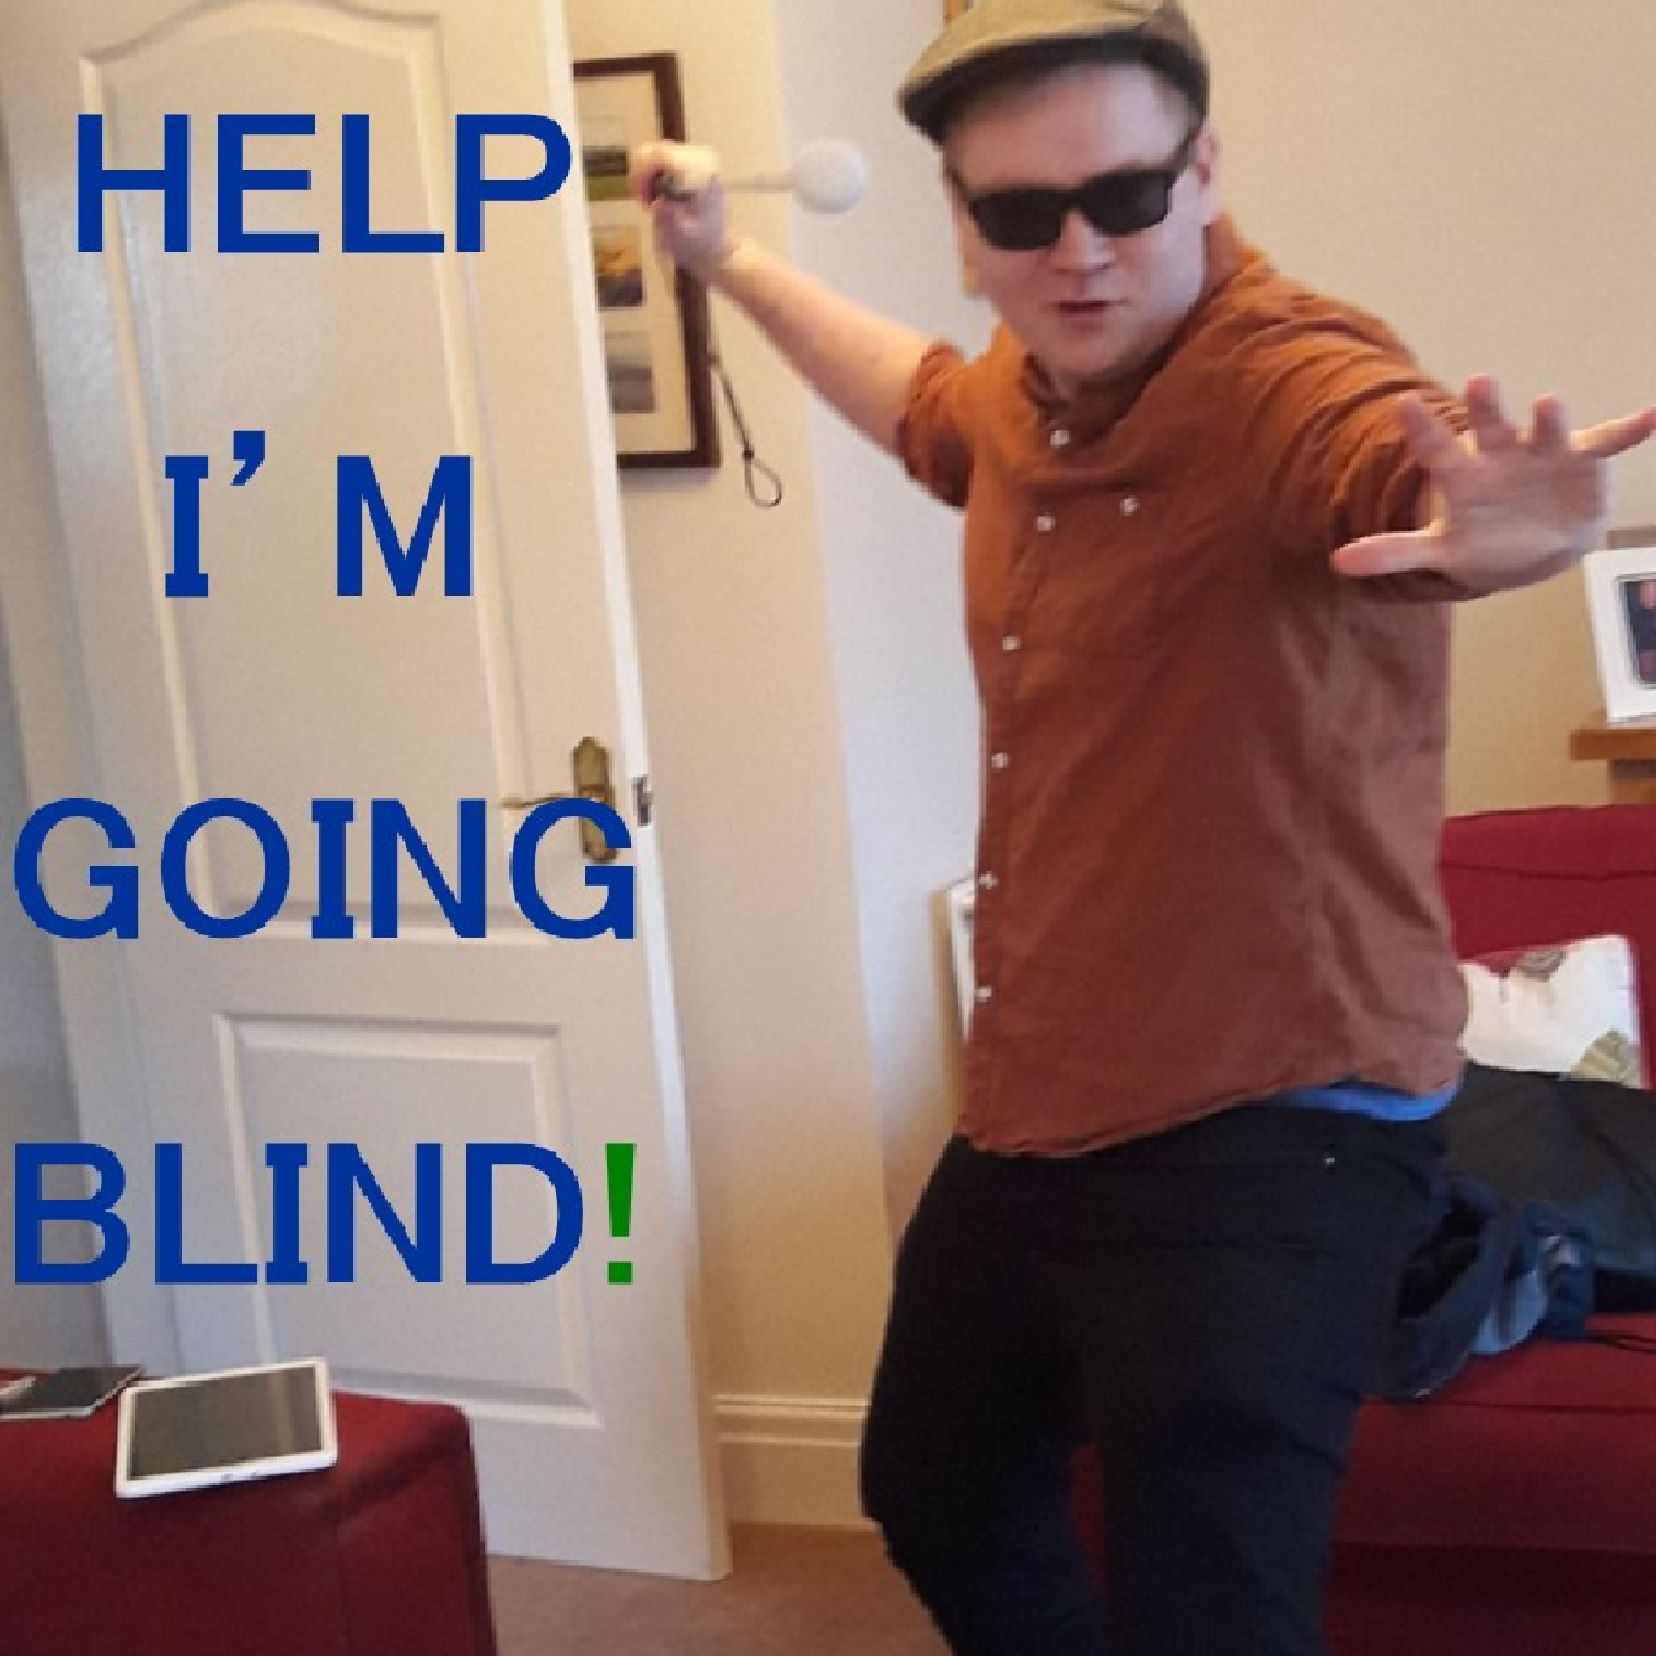 Help I'm Going Blind!